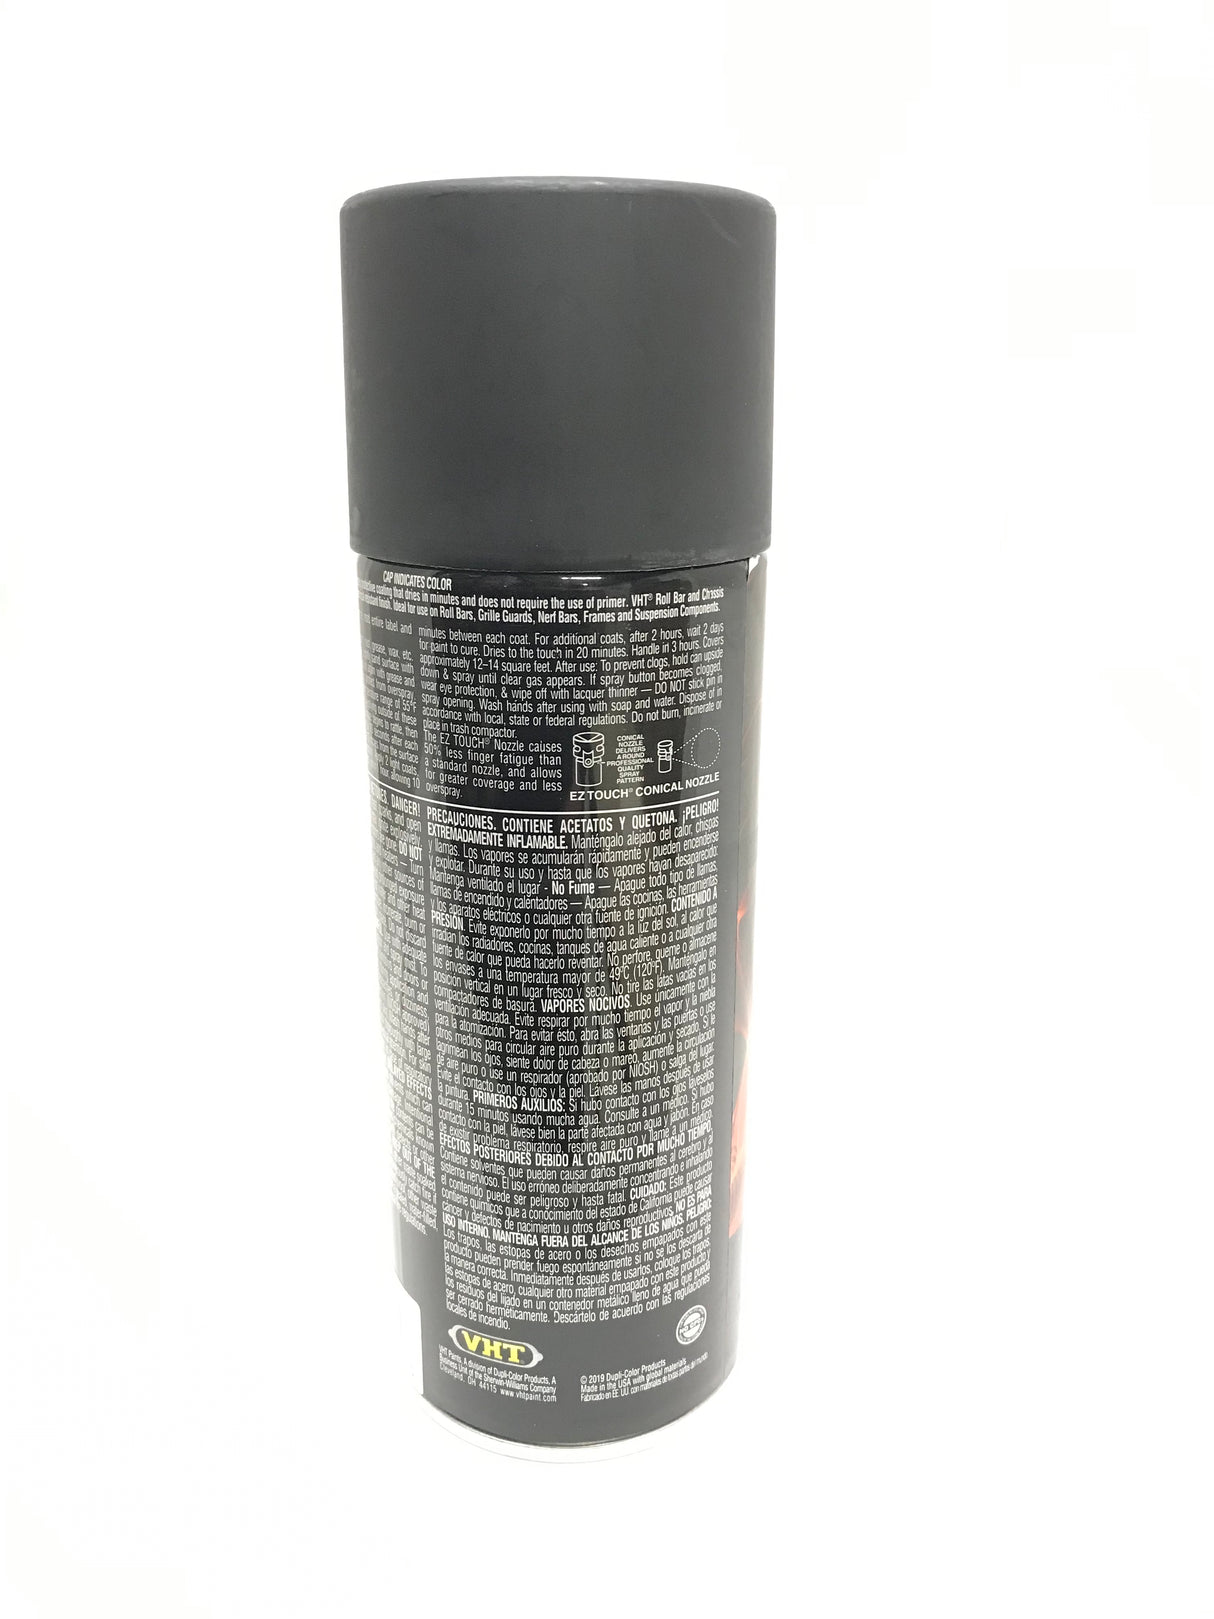 VHT SP671-3 PACK High Temperature SATIN BLACK Roll Bar and Chassis Paint - 11 oz